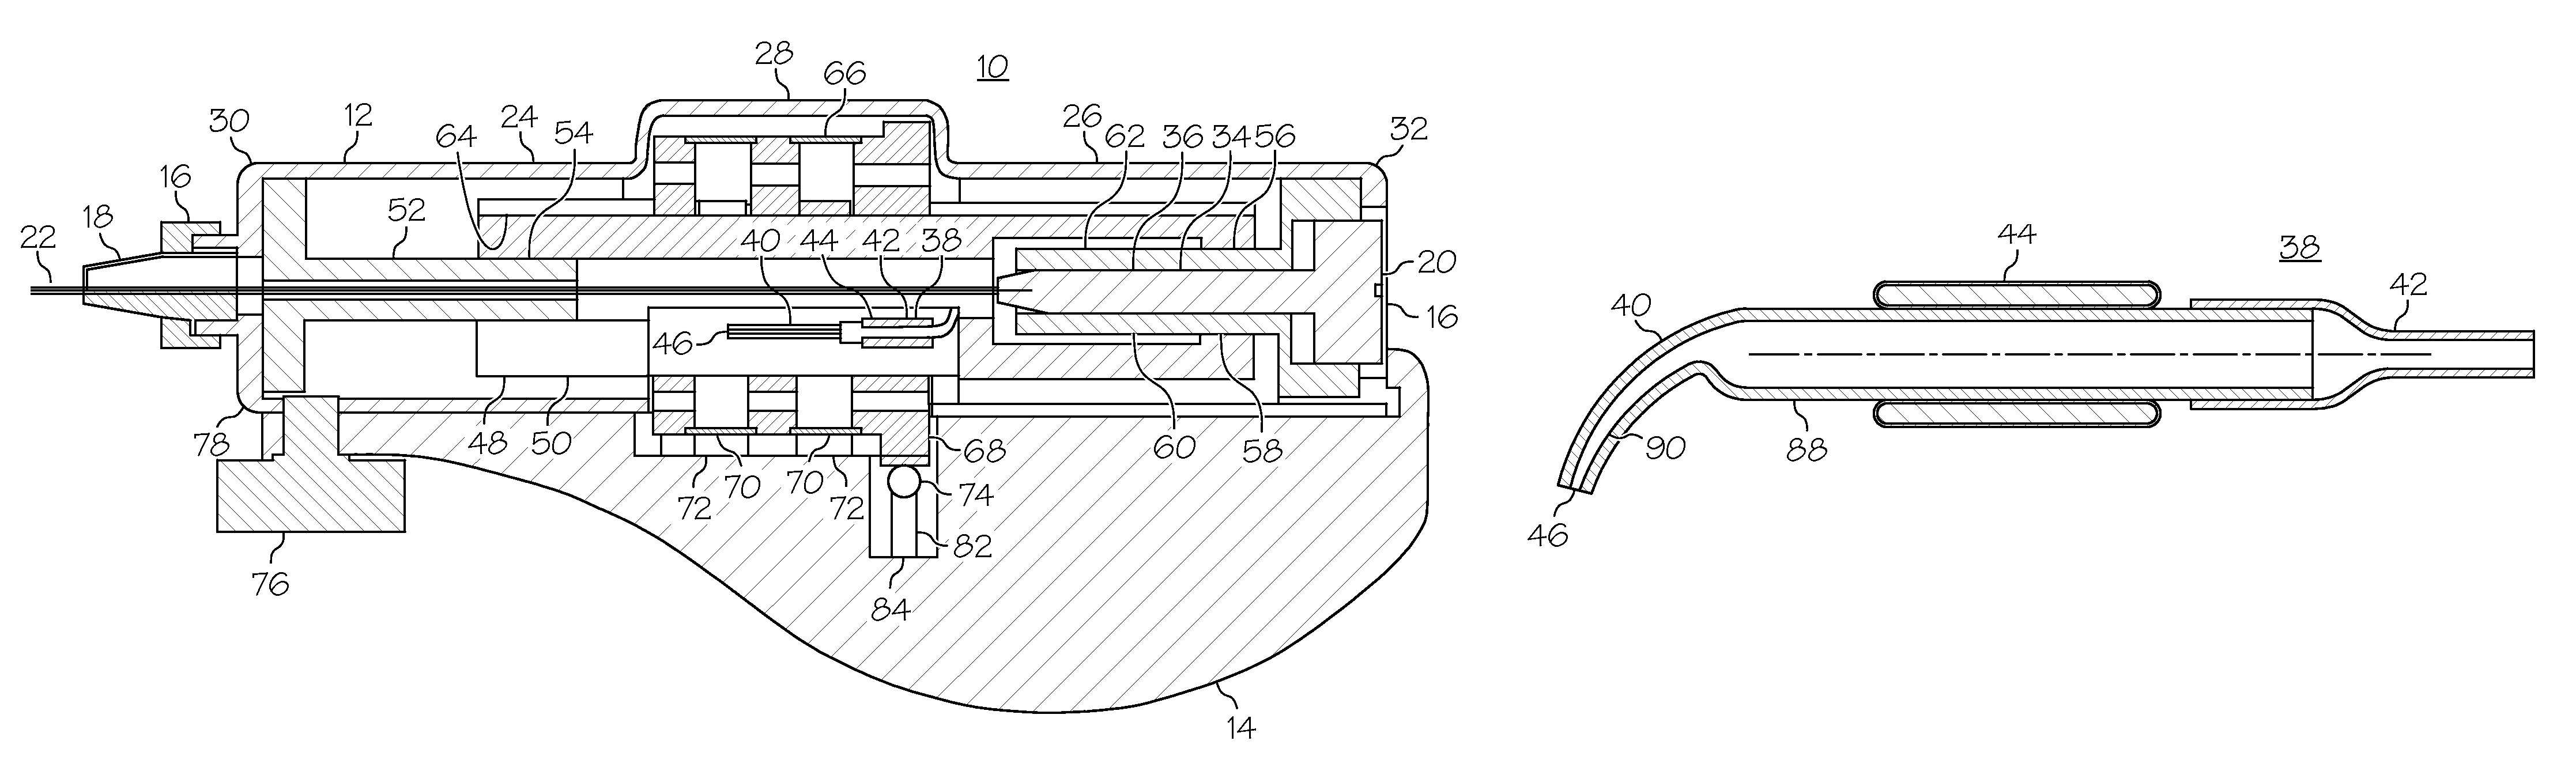 Stent coating apparatus and method